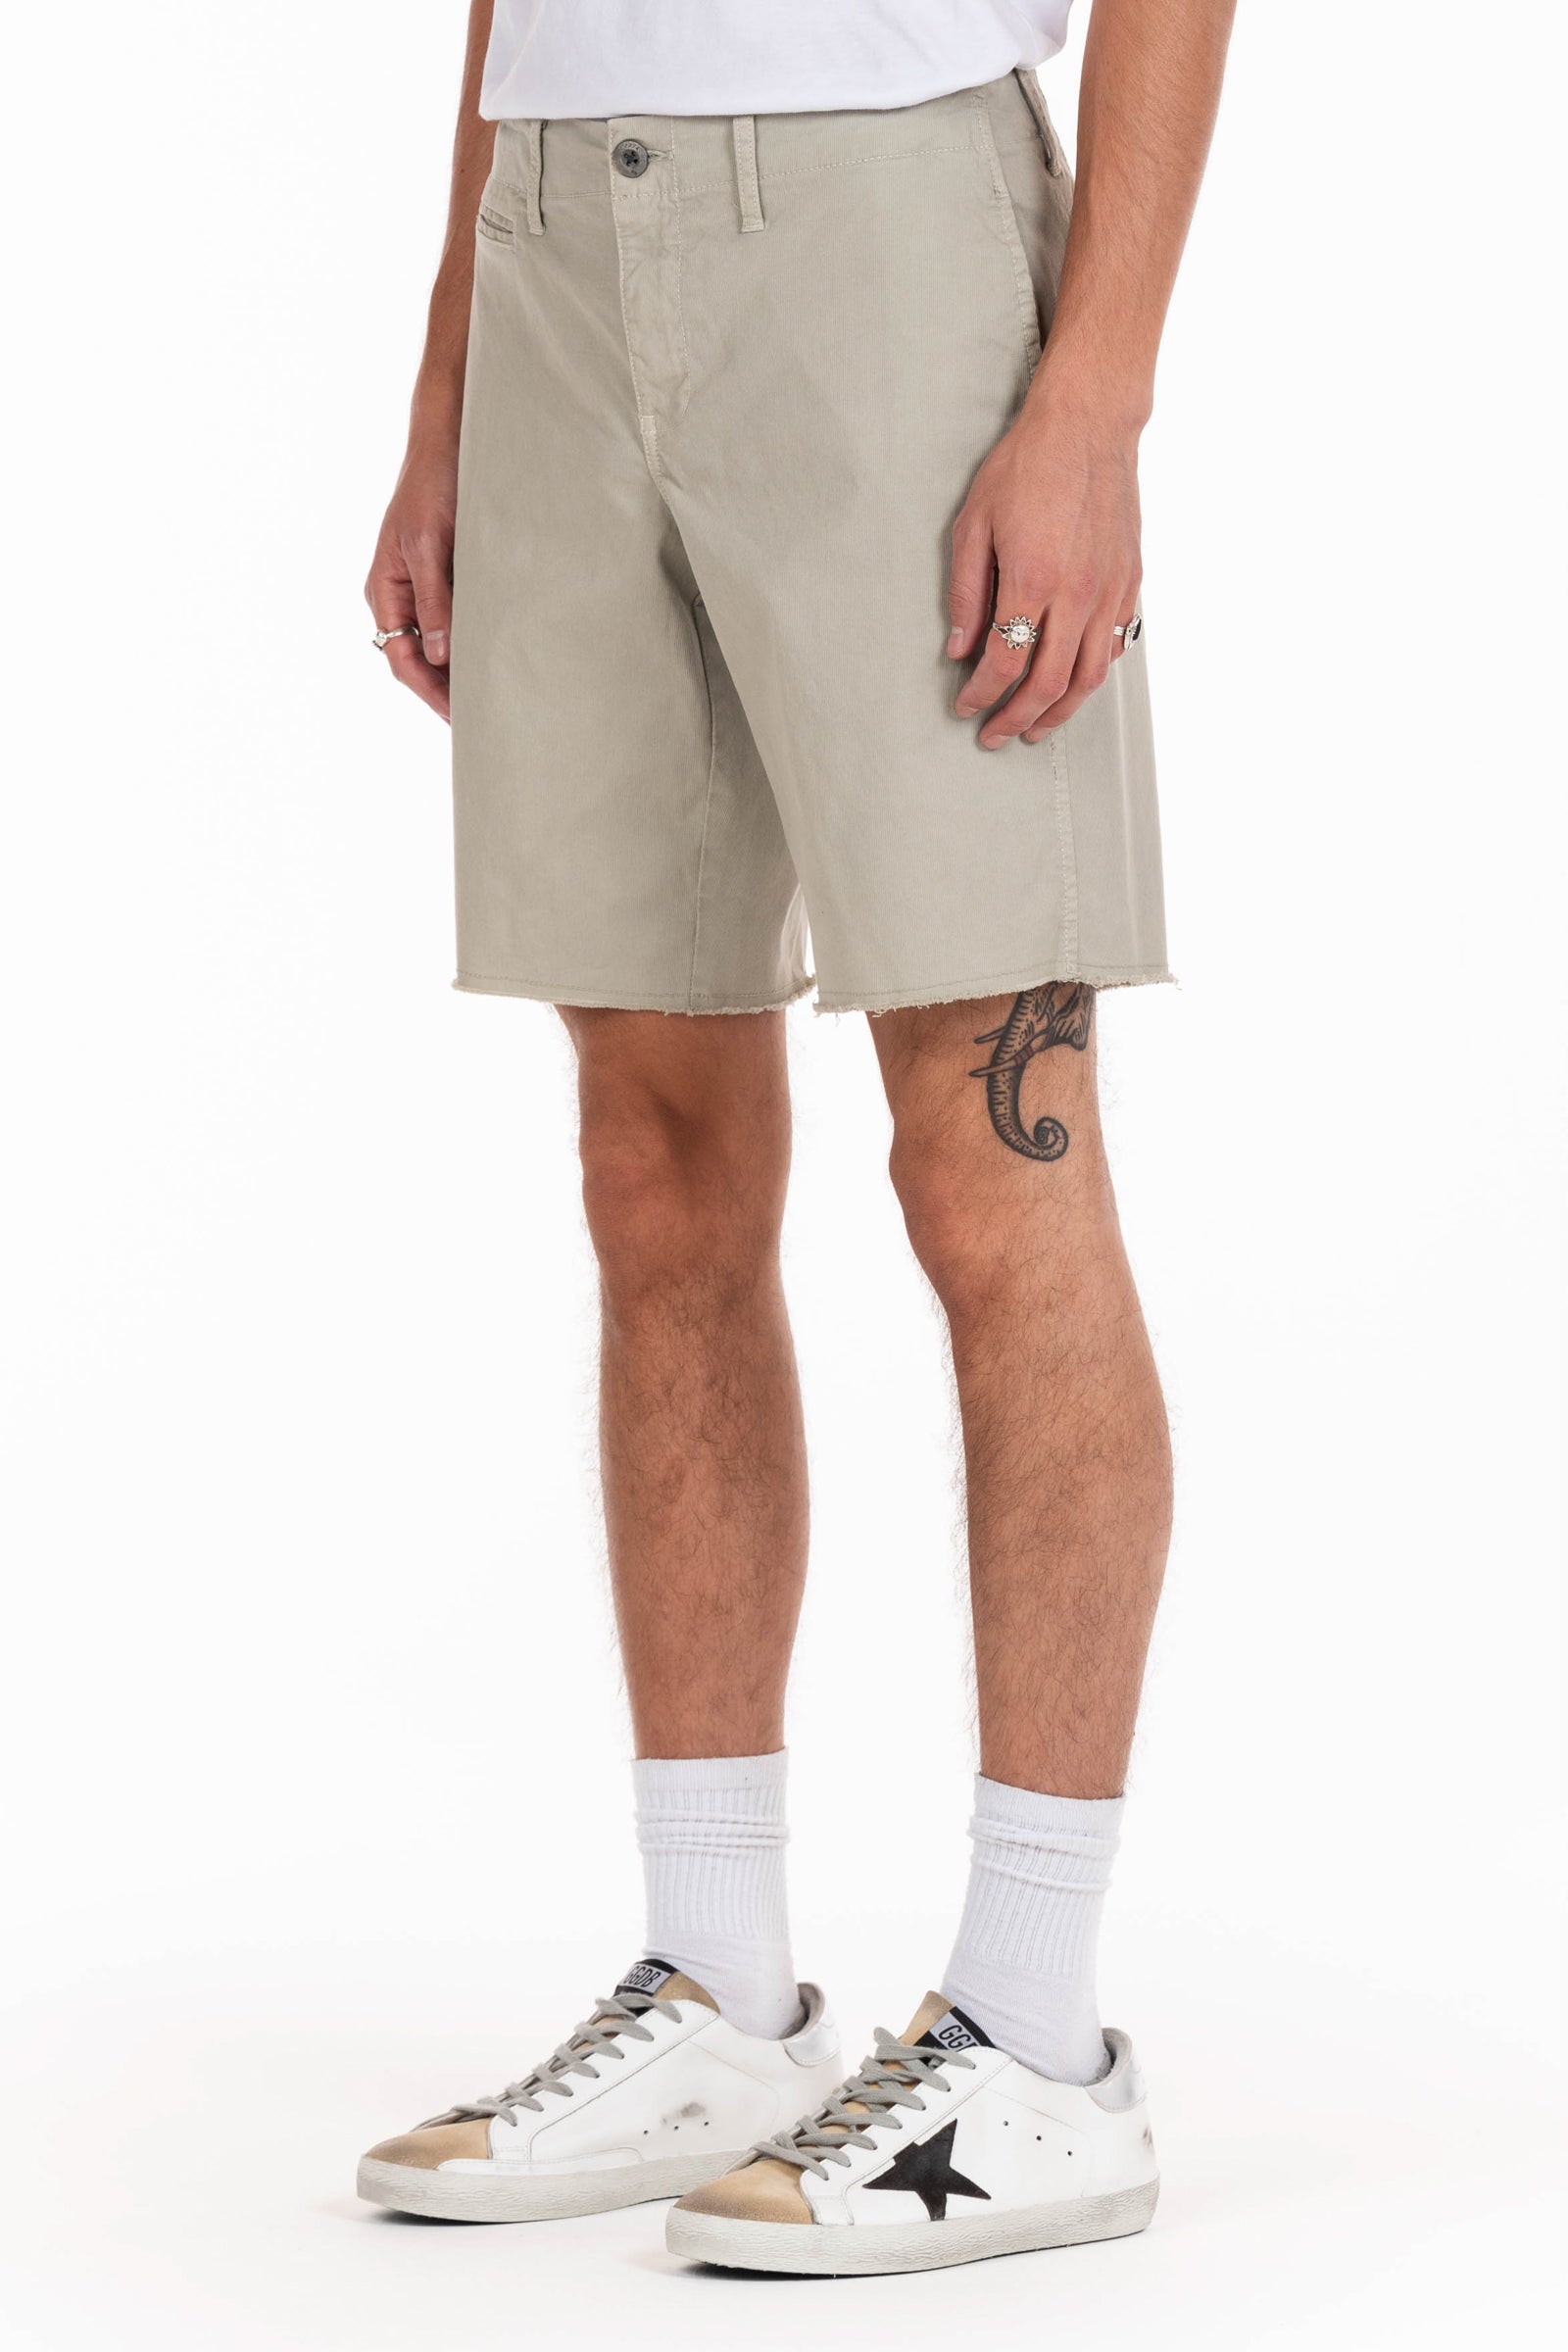 Original Paperbacks Rockland Chino Short in Bone on Model Cropped Side View